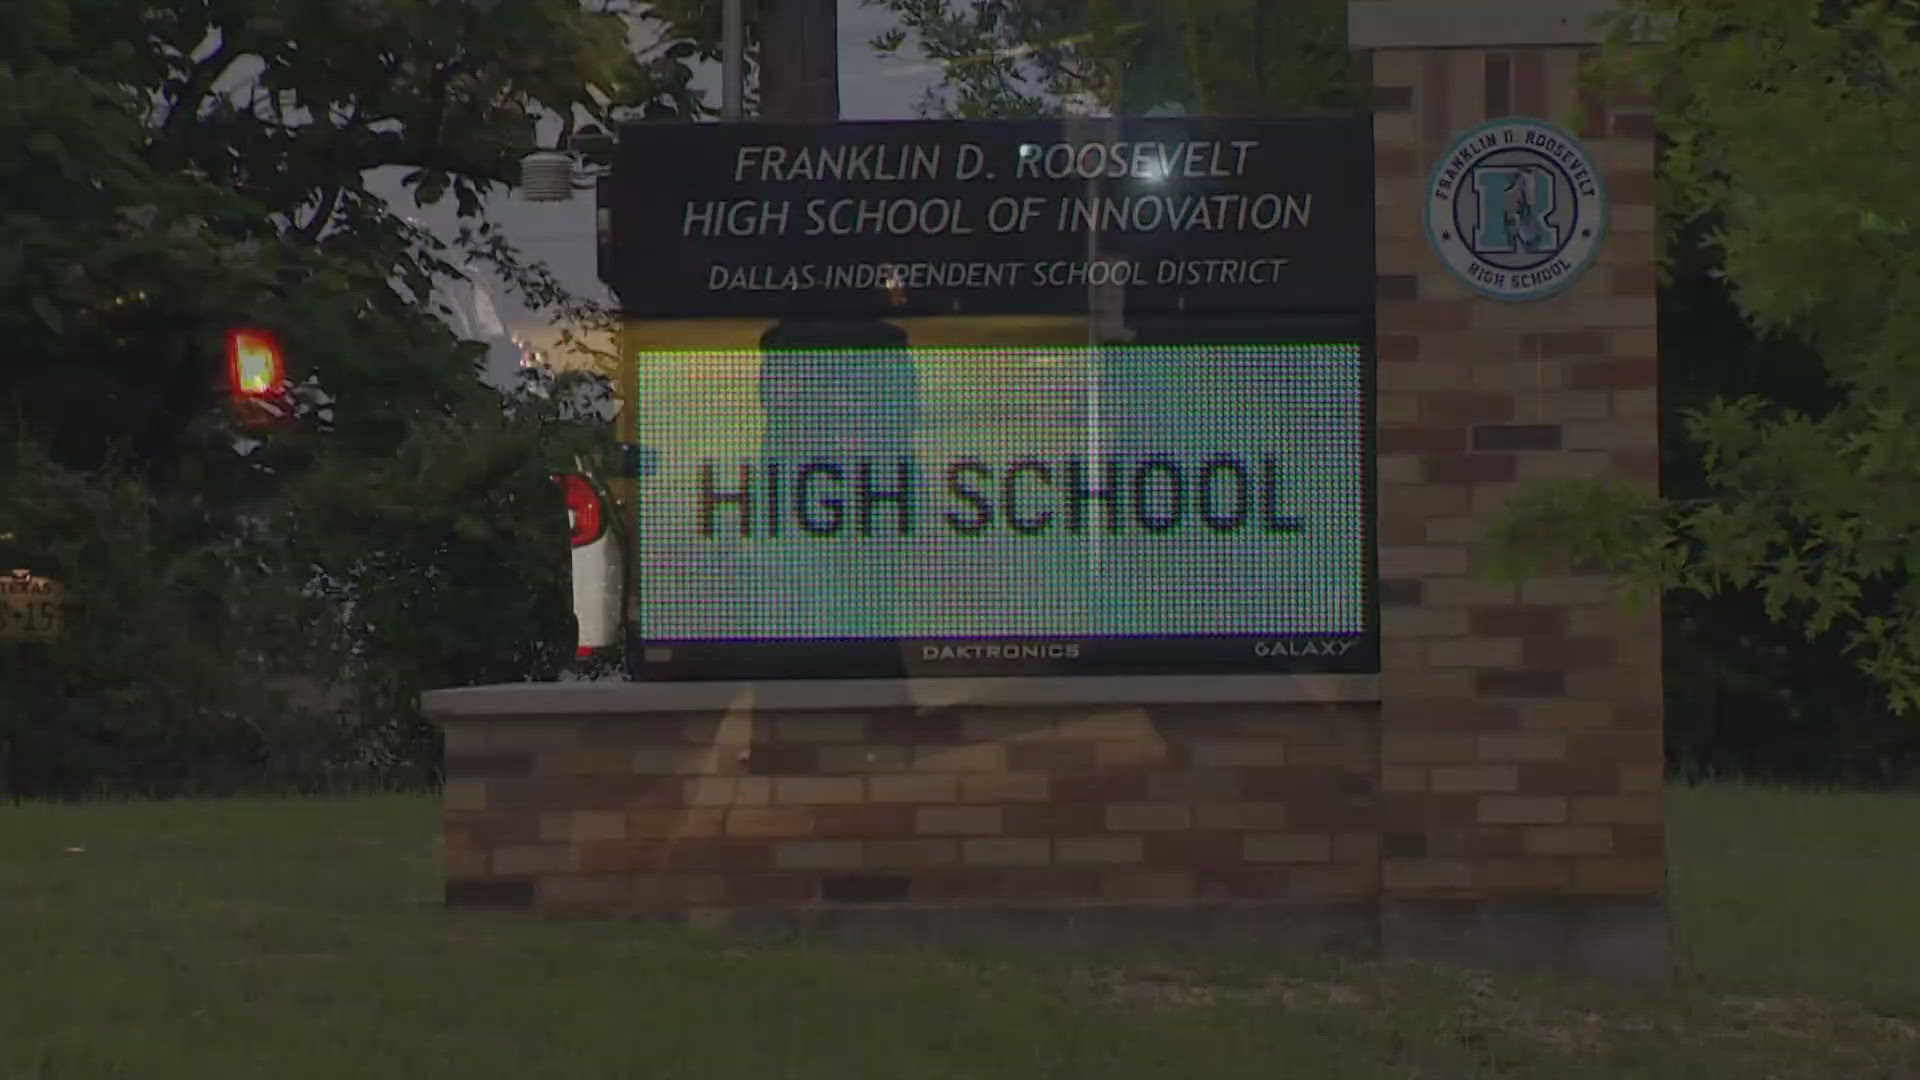 Two high school football players were hospitalized after they were injured in a drive-by shooting in Dallas while riding home from practice with their coach.